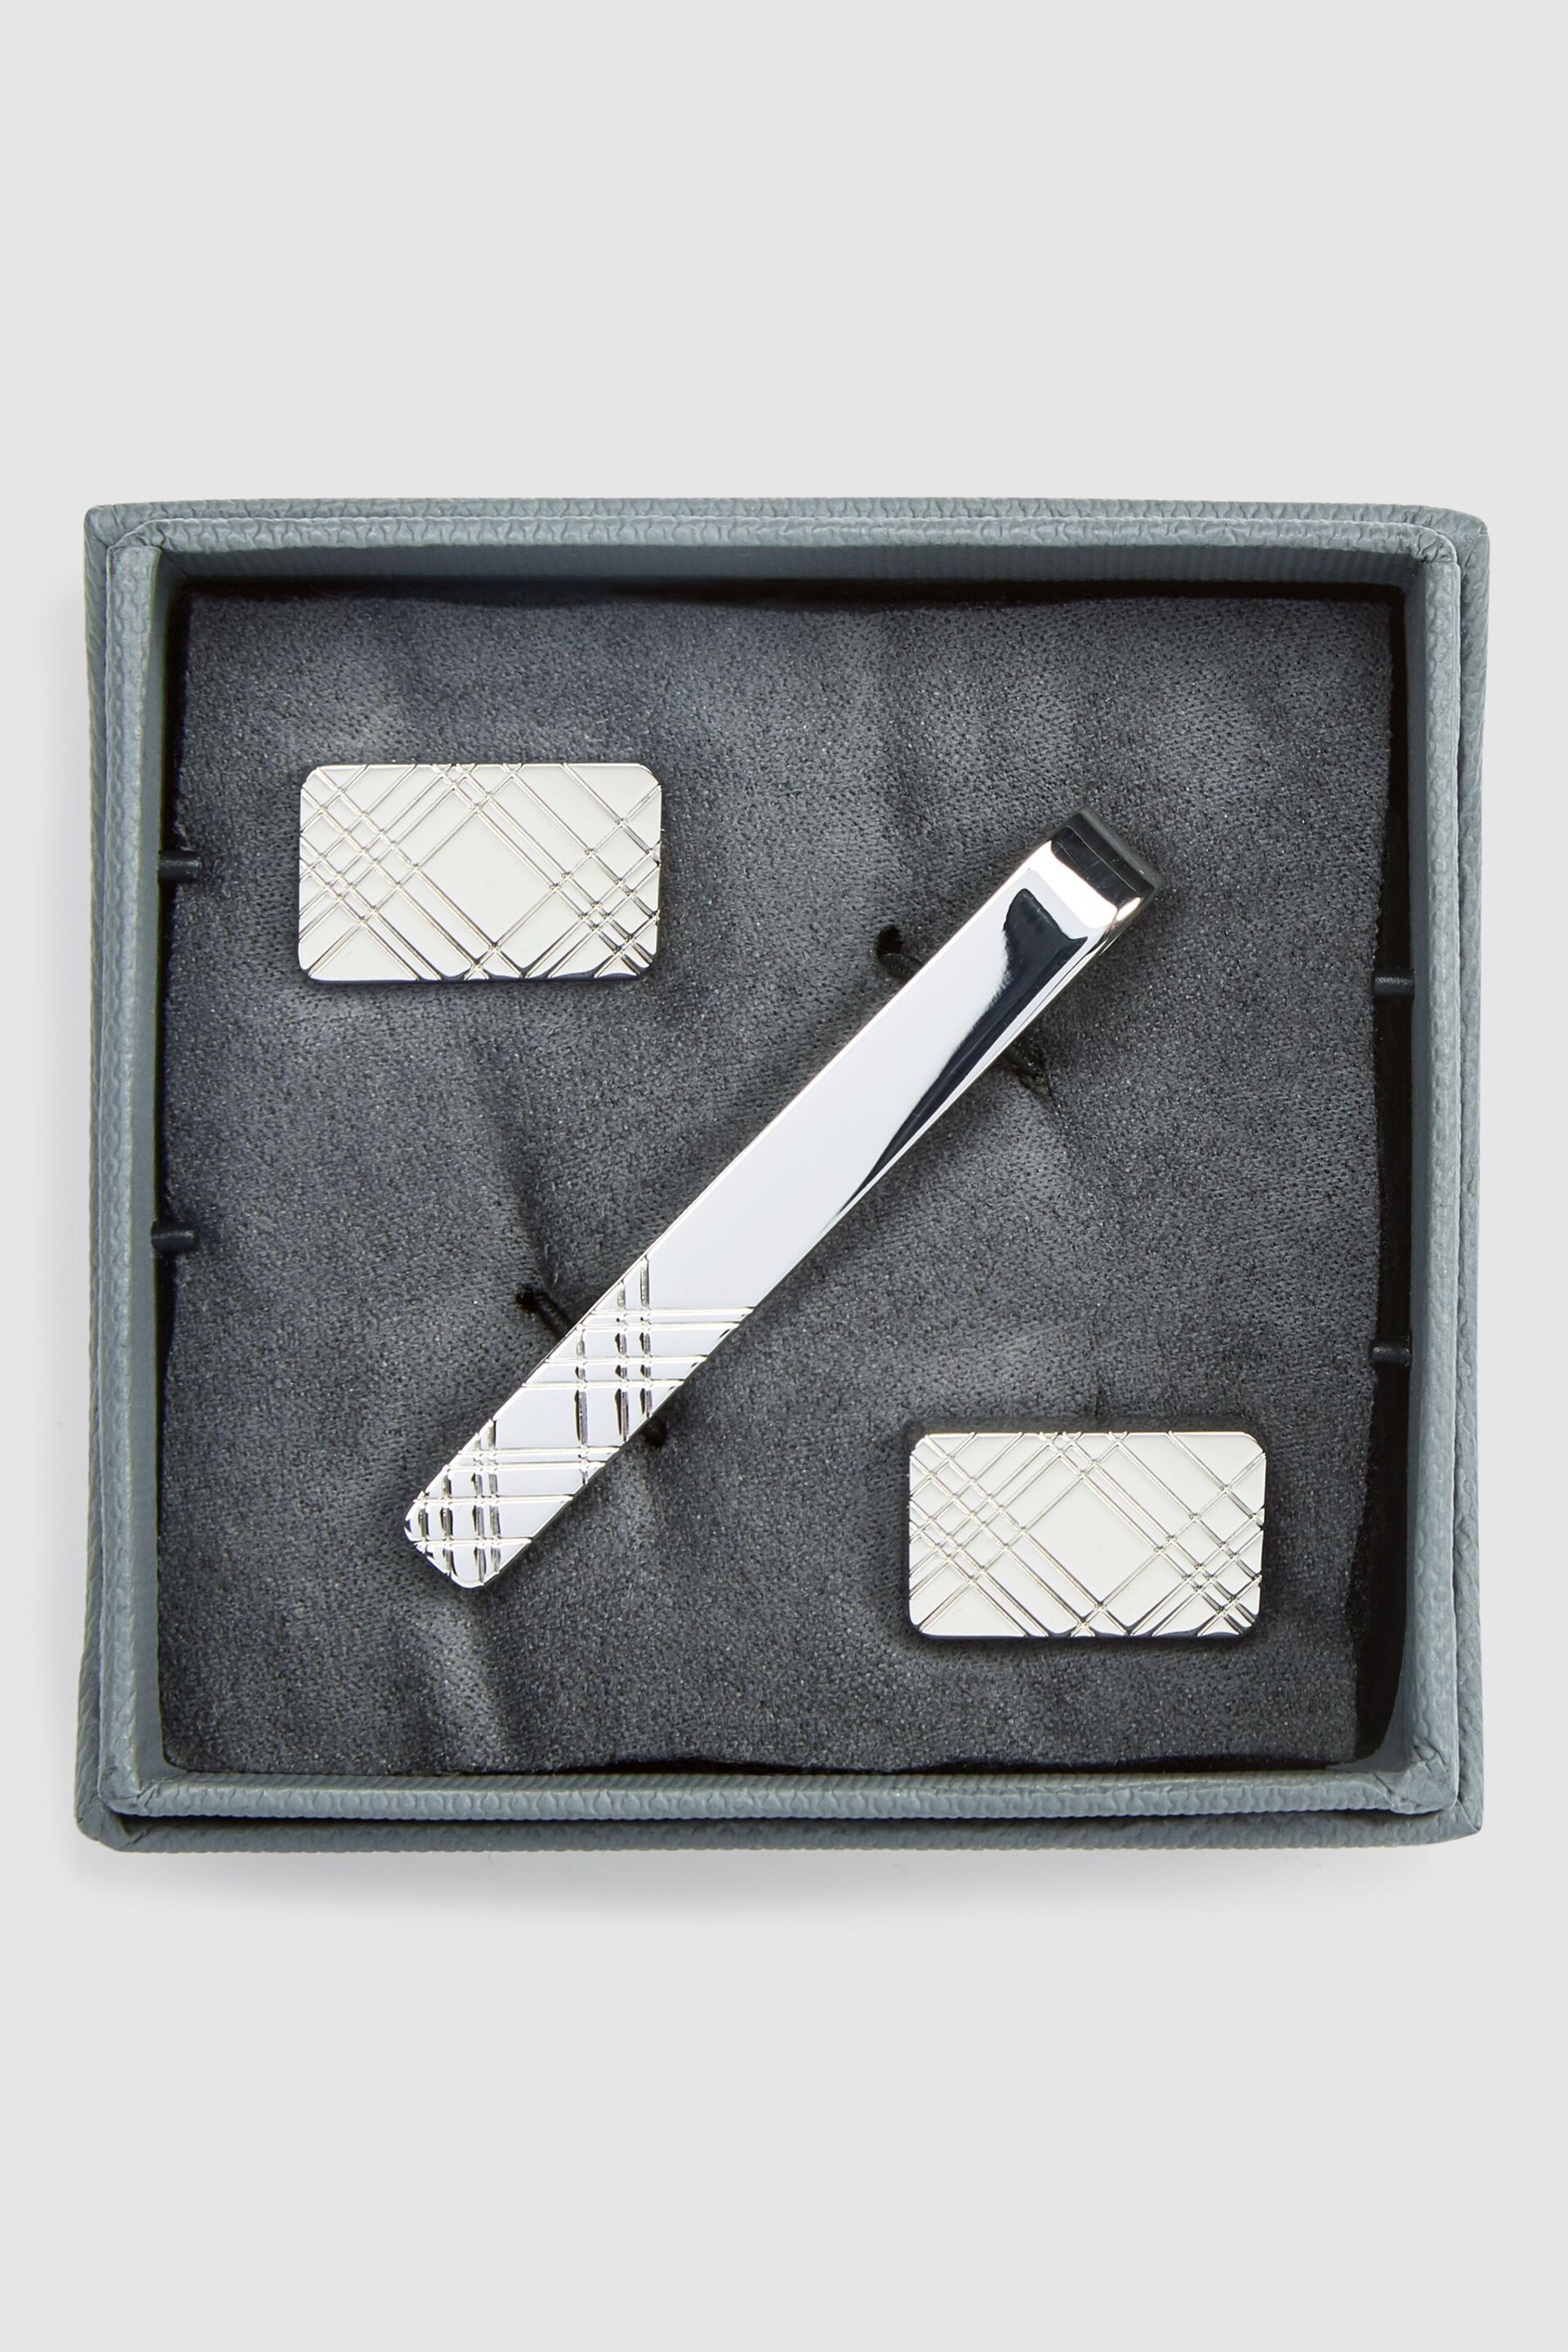 Silver Tone Cufflink And Tie Clip Set - Image 5 of 6